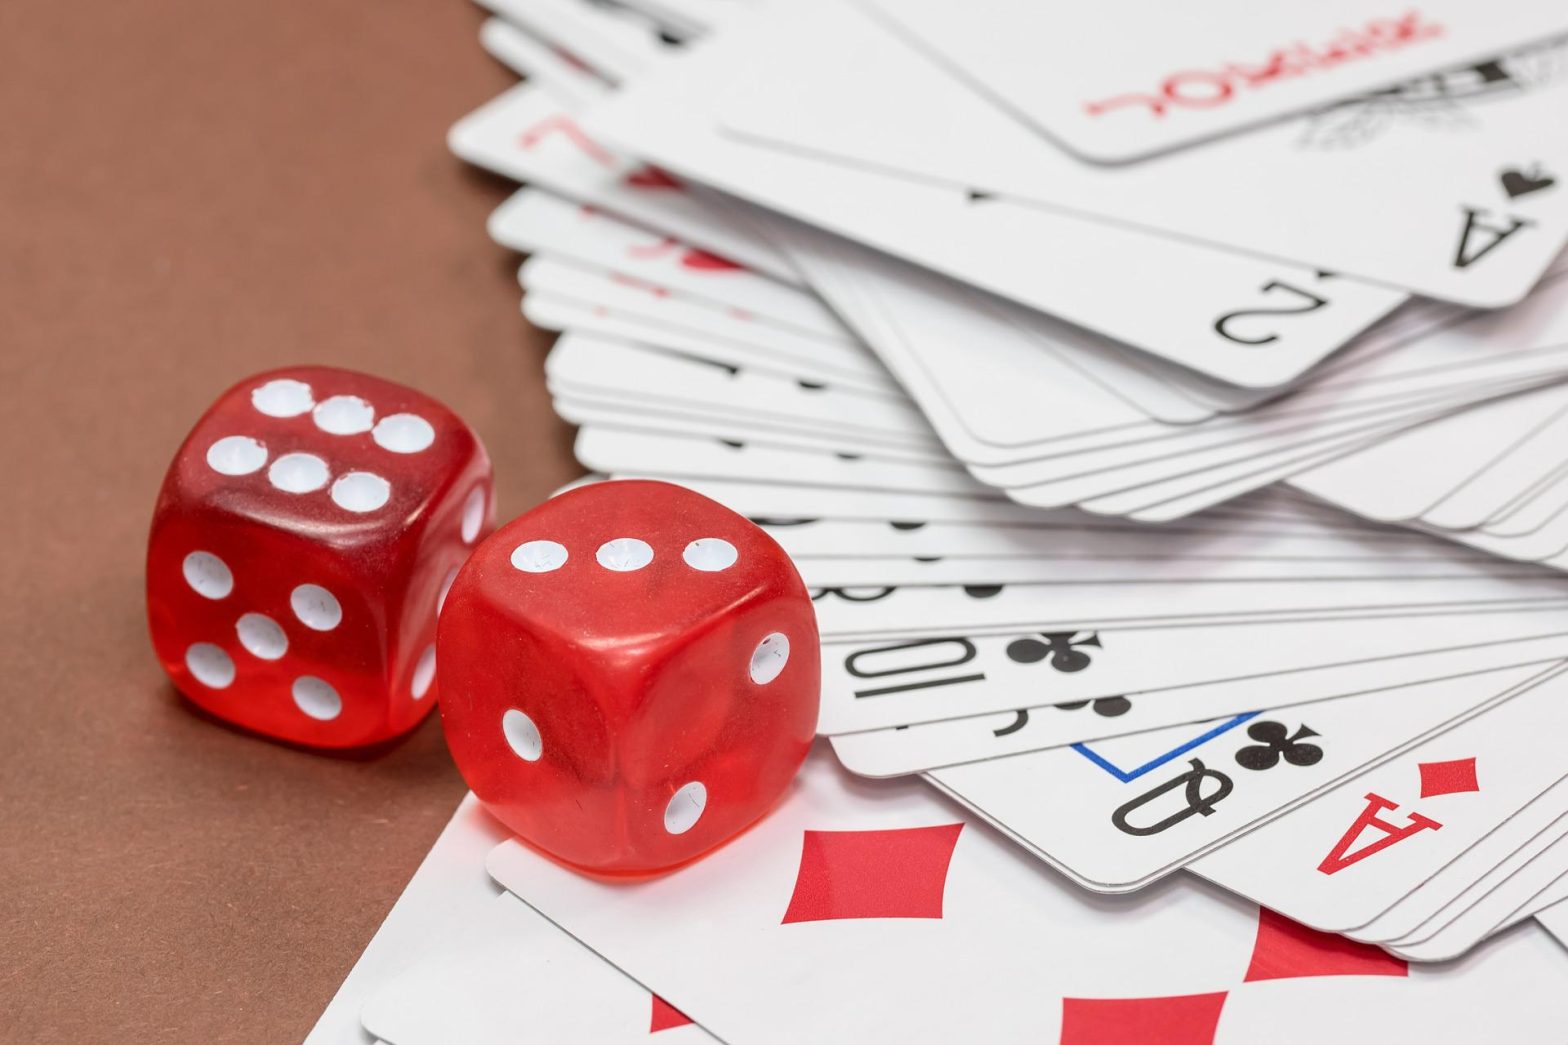 The best tips for successful blackjack playing